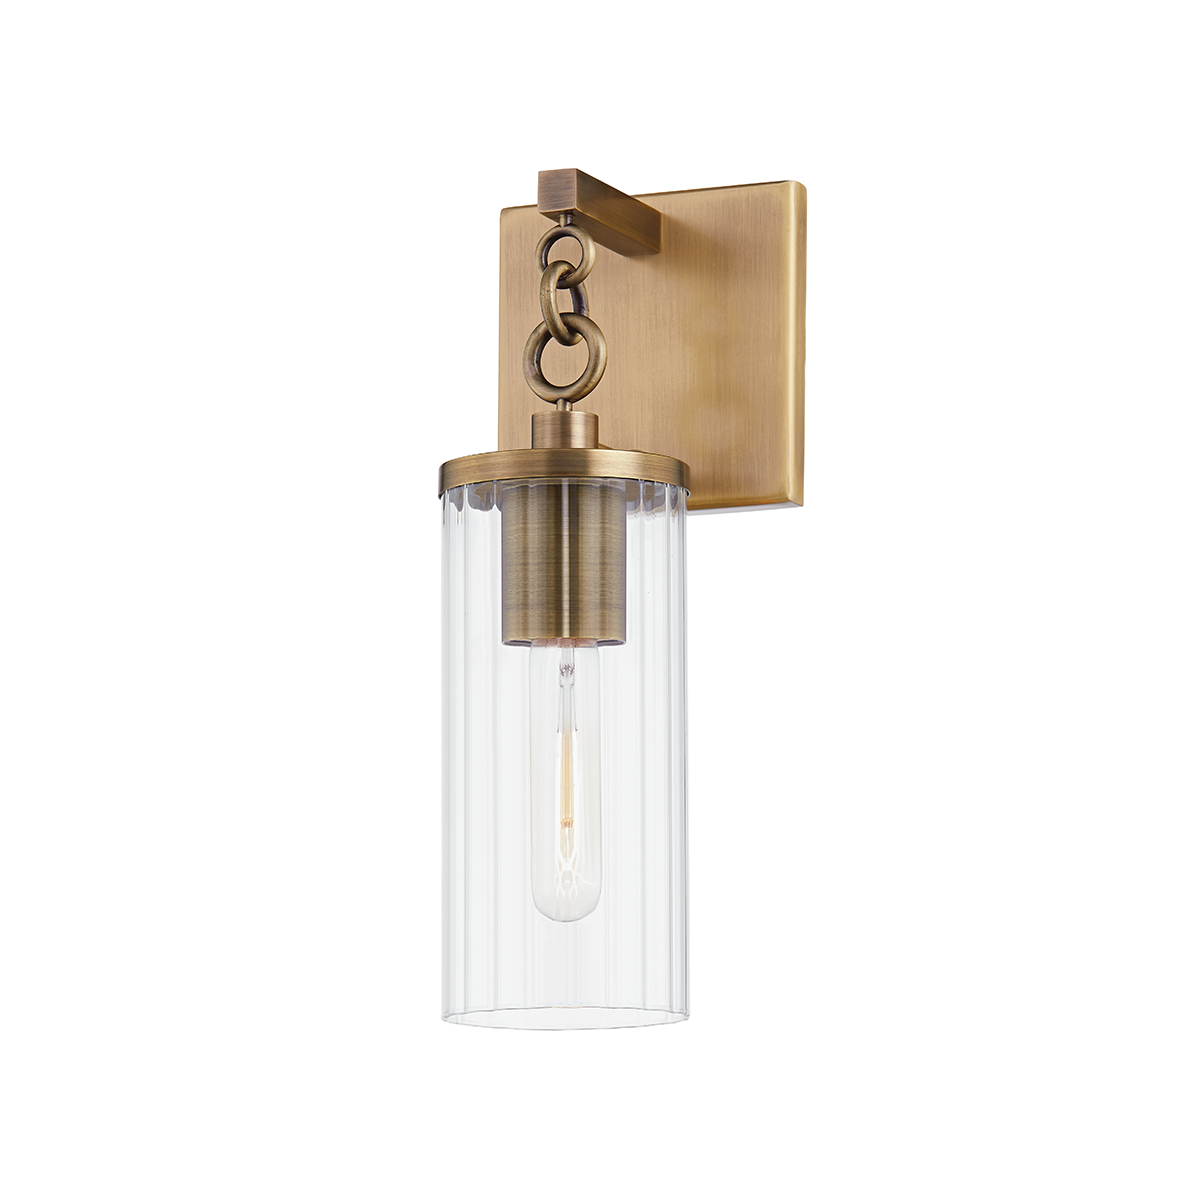 Troy Lighting 1 LIGHT SMALL EXTERIOR WALL SCONCE B6121 Outdoor l Wall Troy Lighting PATINA BRASS  